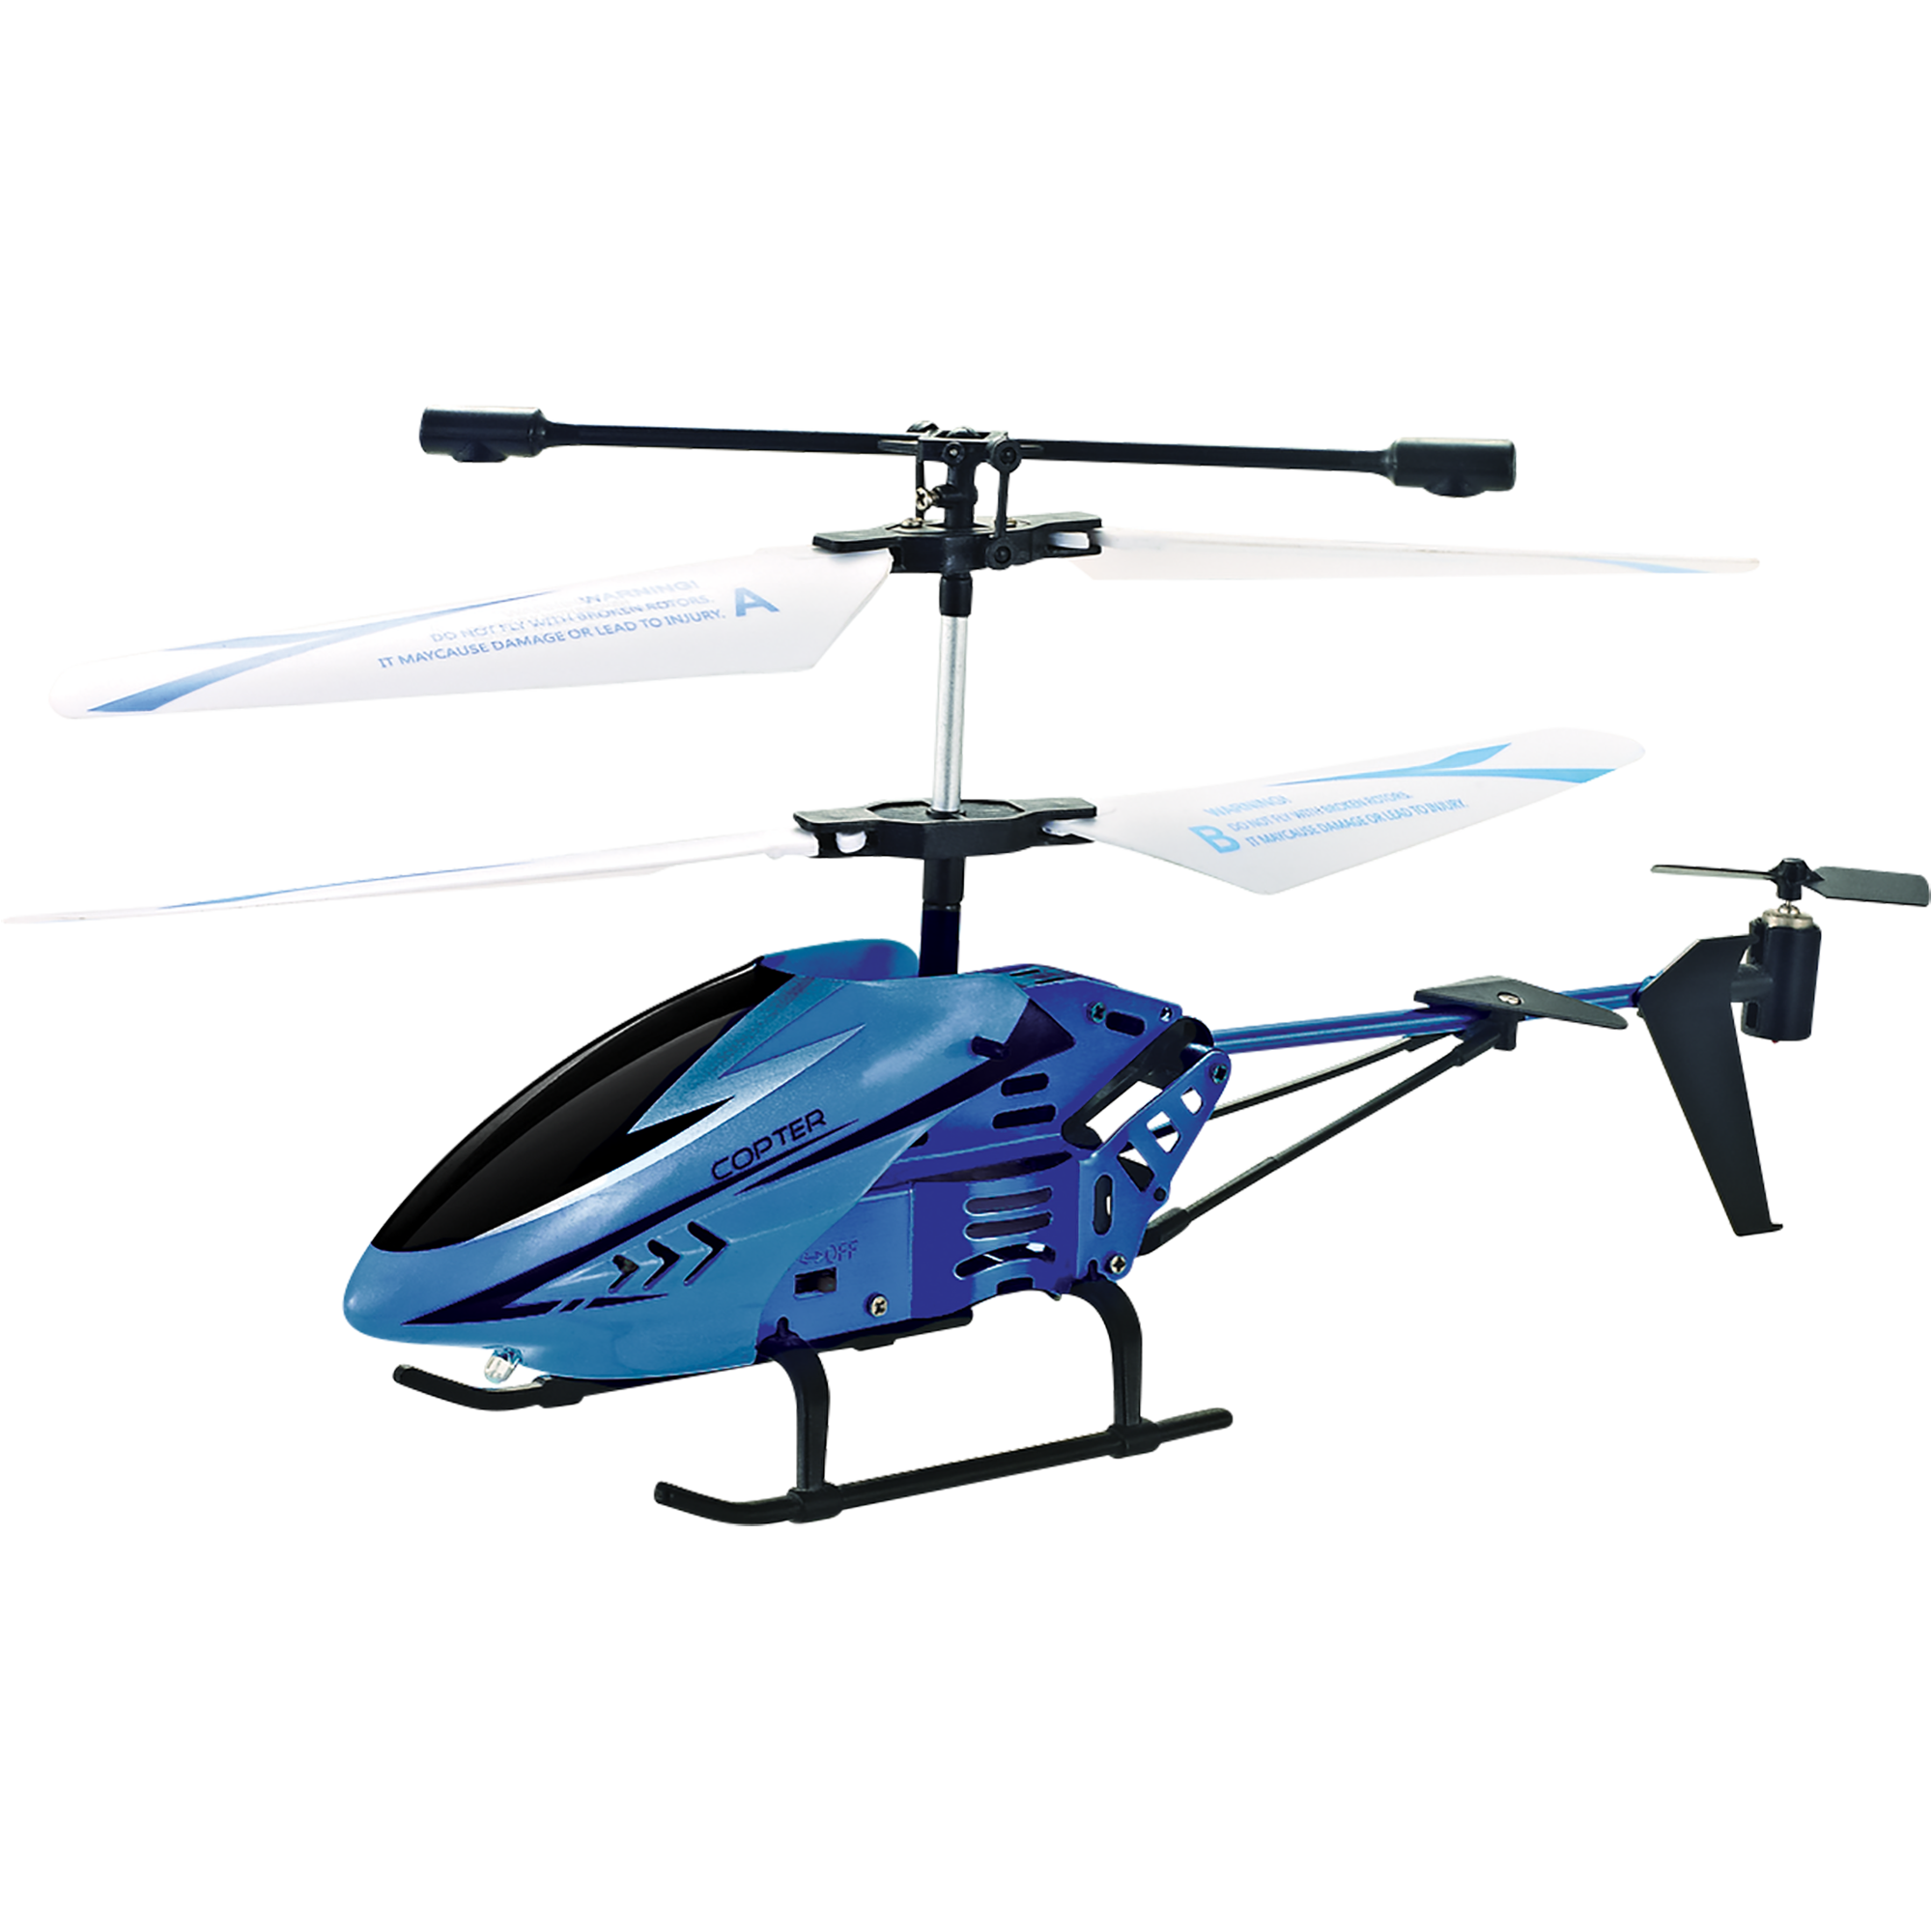 Elicottero fast copter - MOTOR & CO.